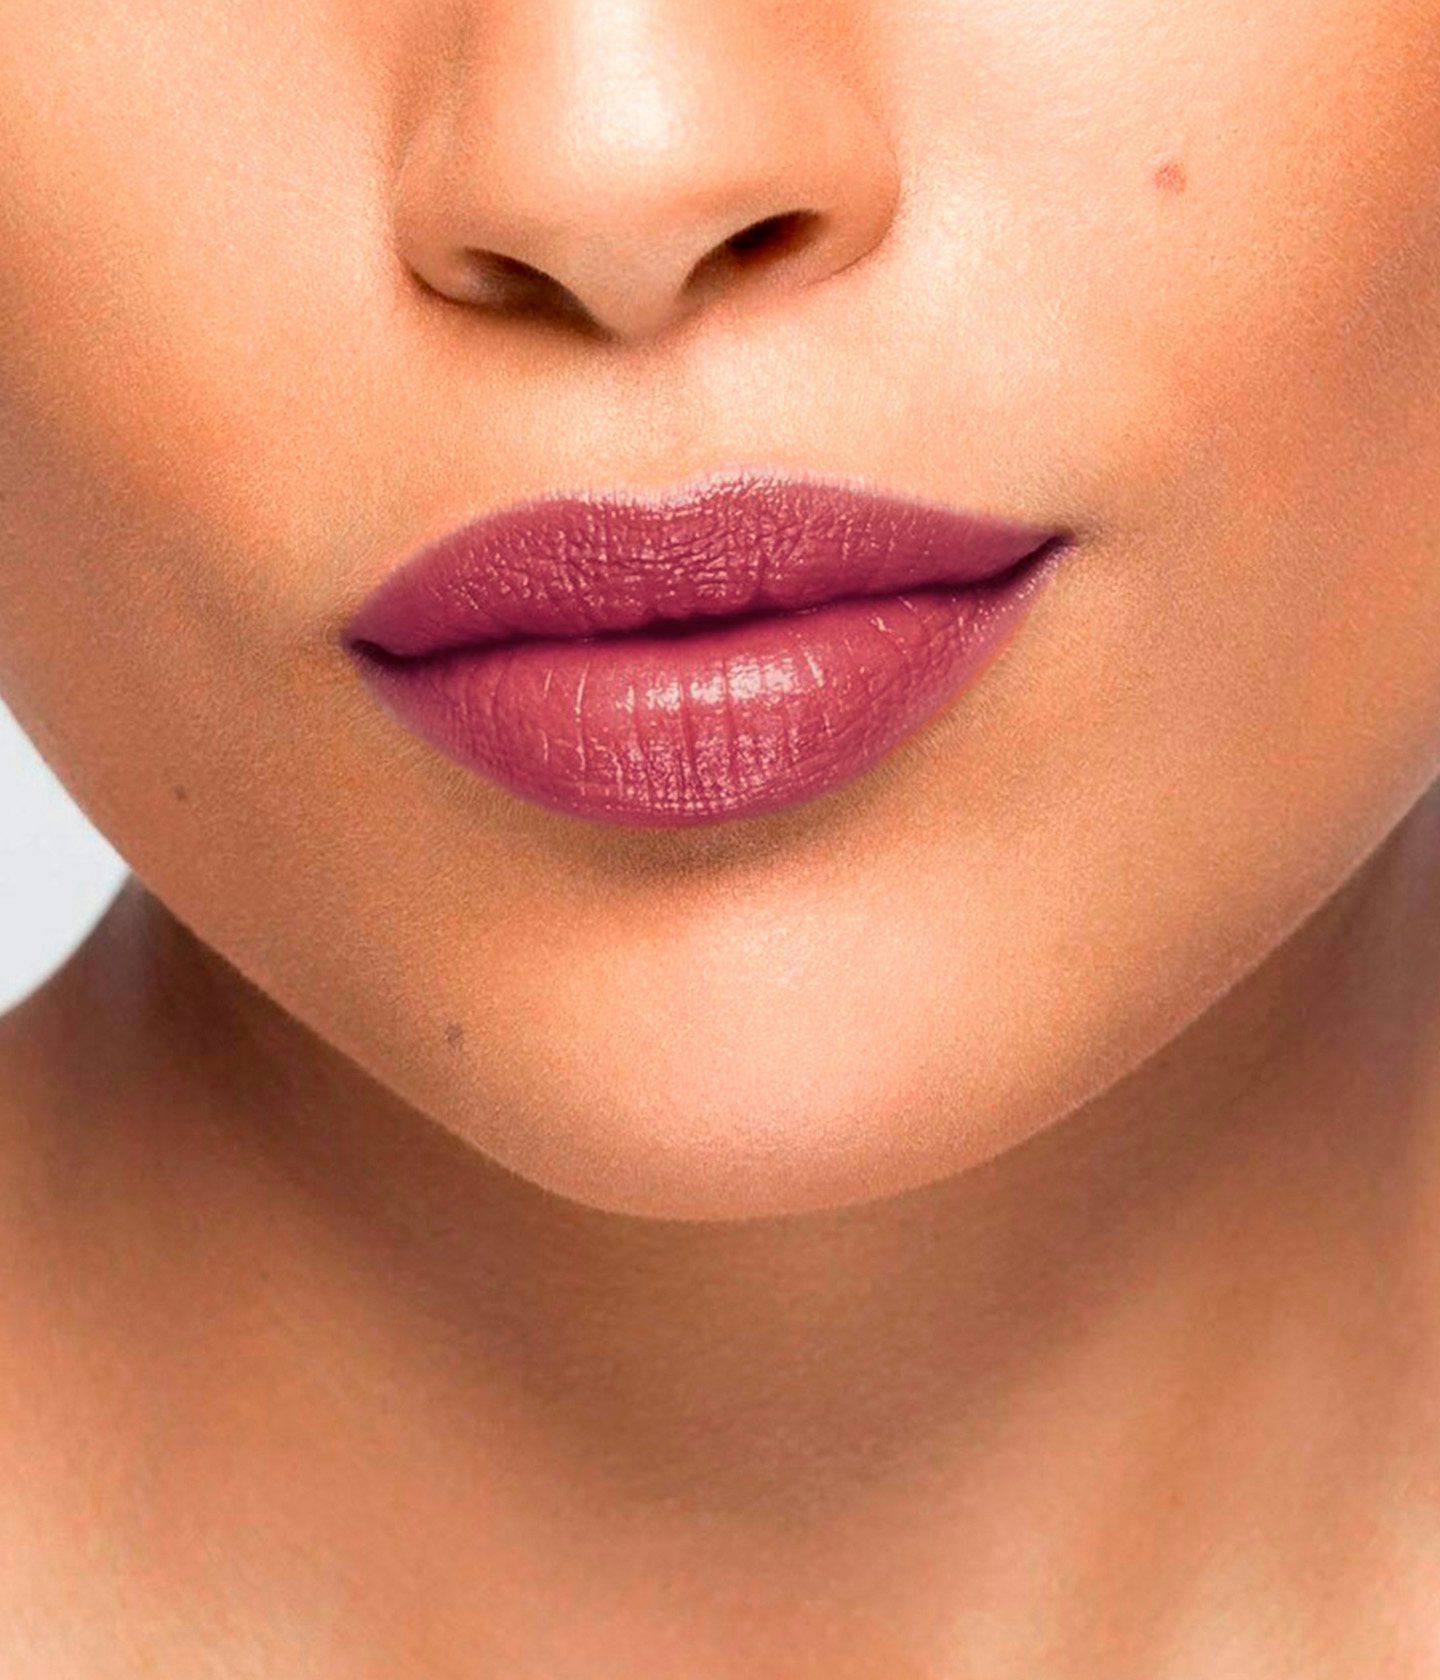 La bouche rouge Le Baume Kelly lipstick shade on the lips of a medium skin model